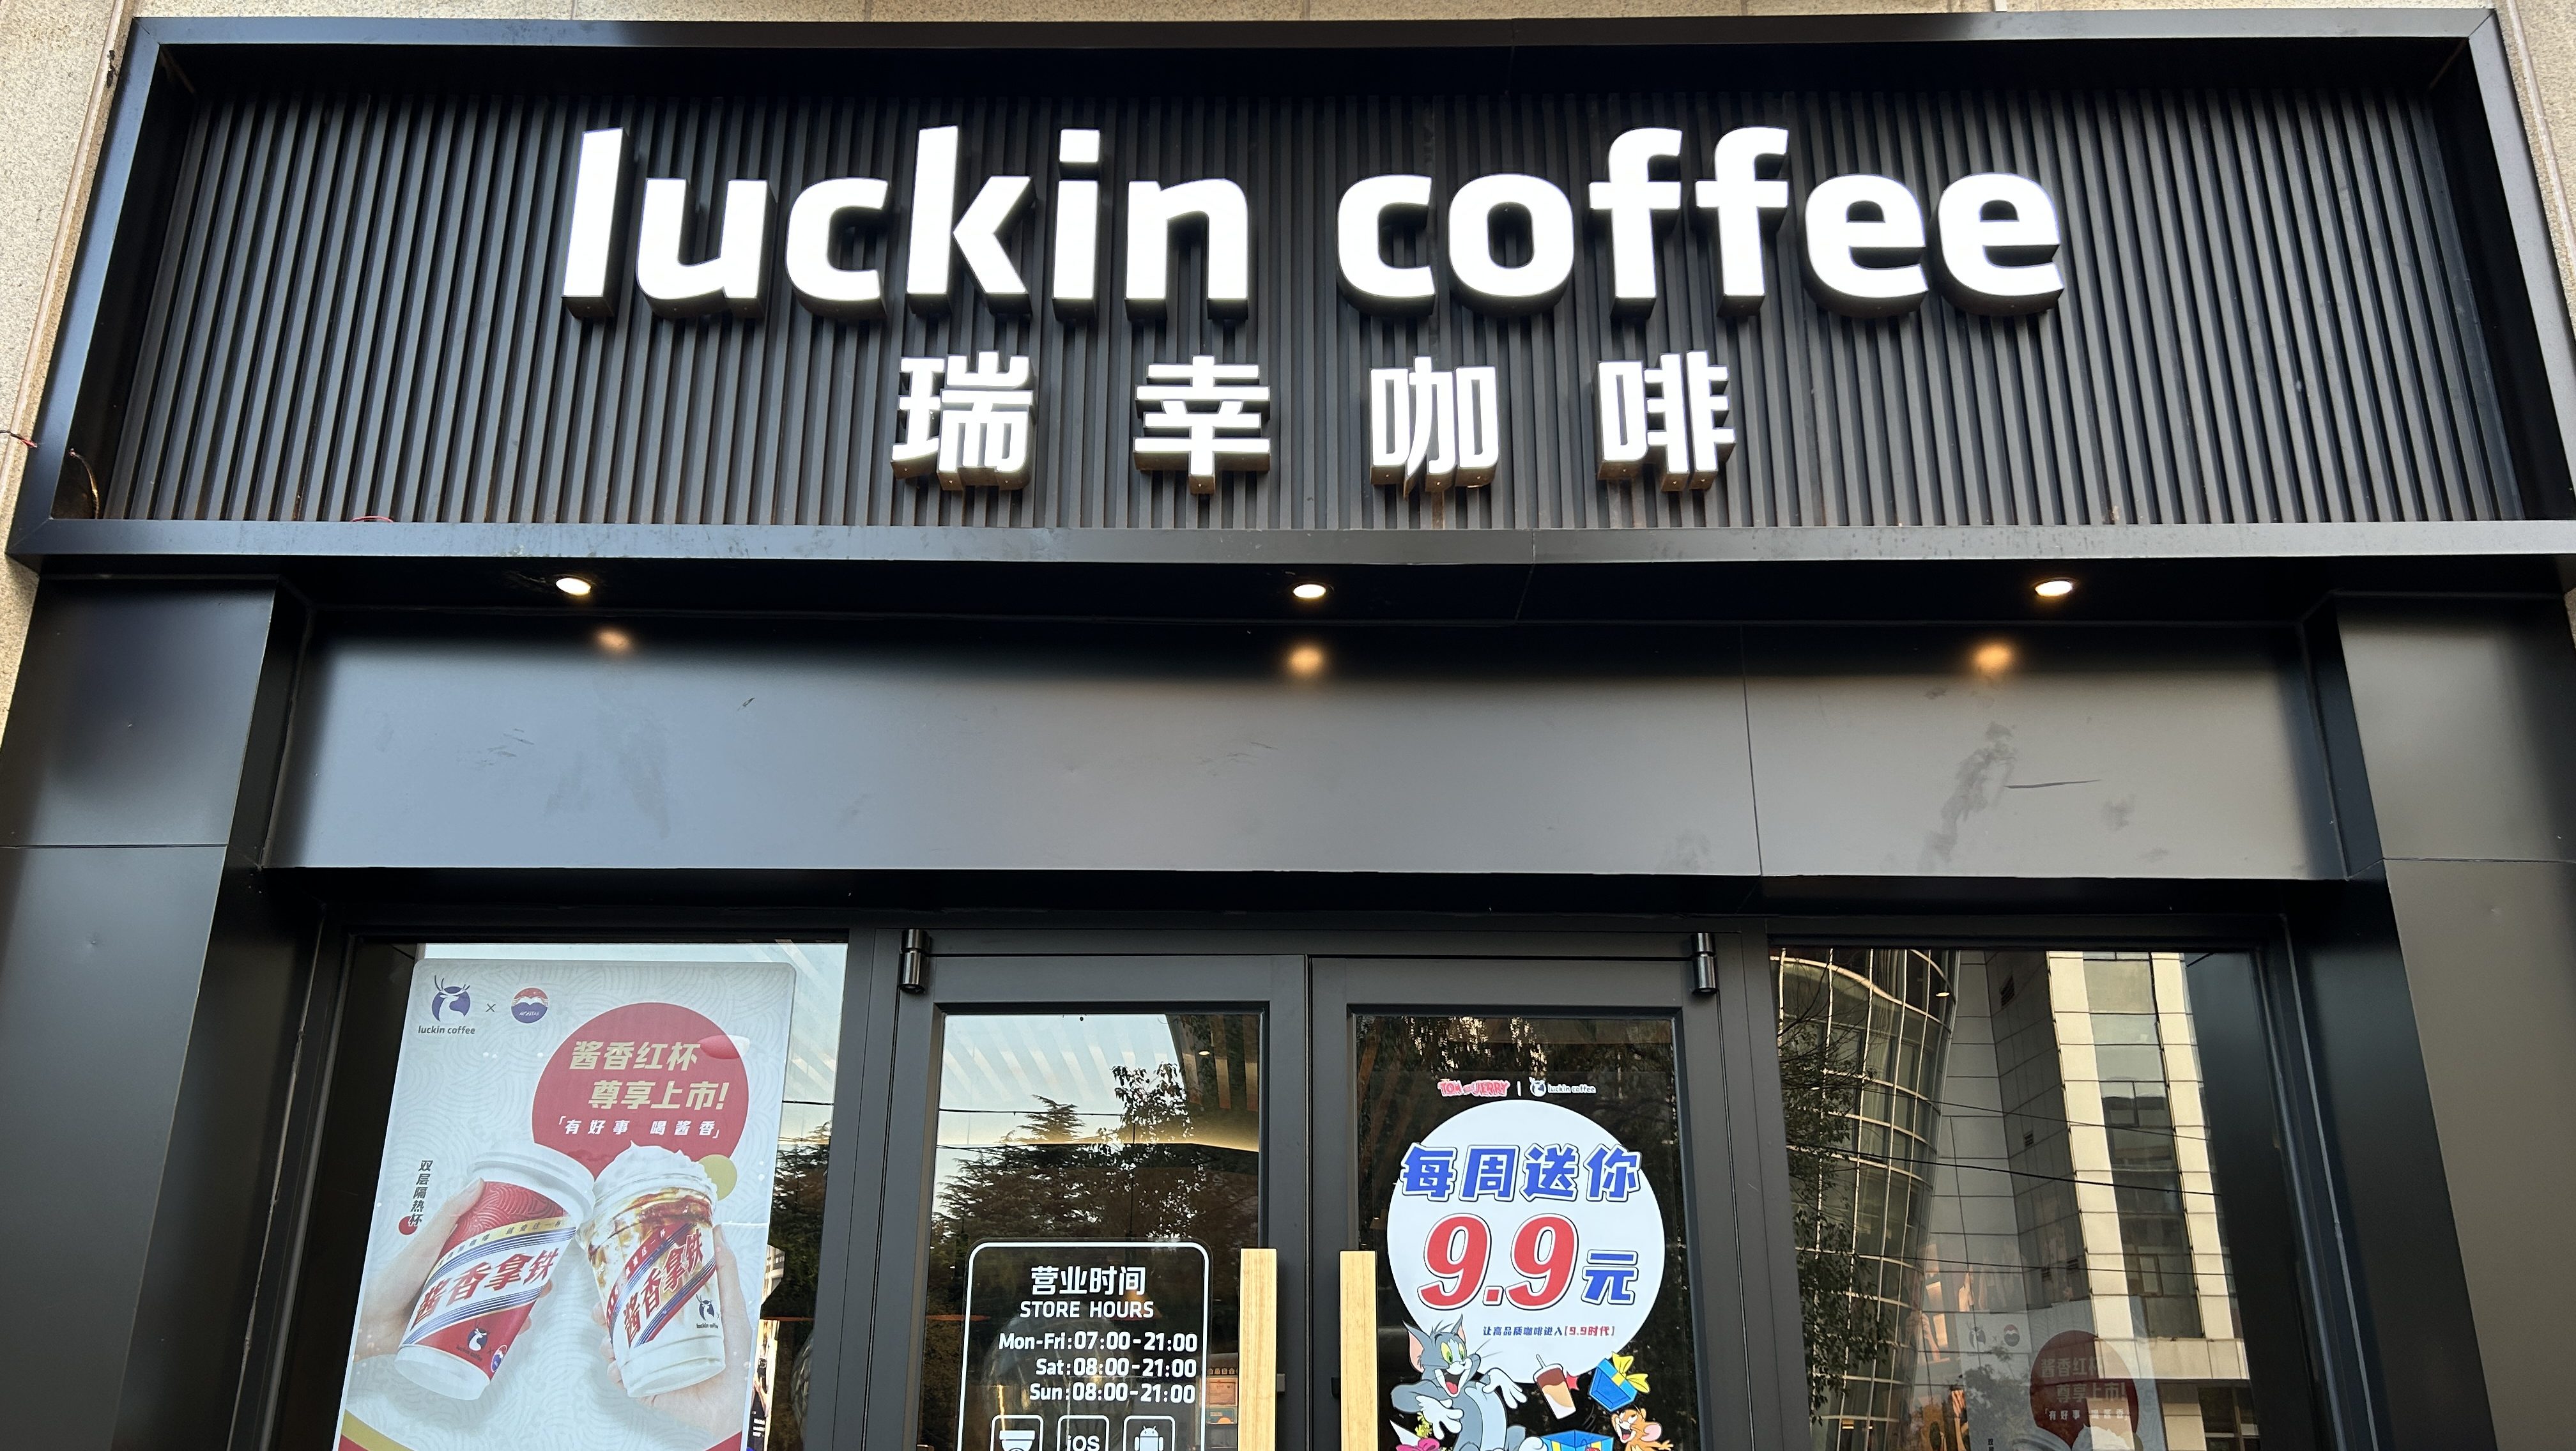 China's Luckin Coffee pulled off a dramatic turnaround. How?